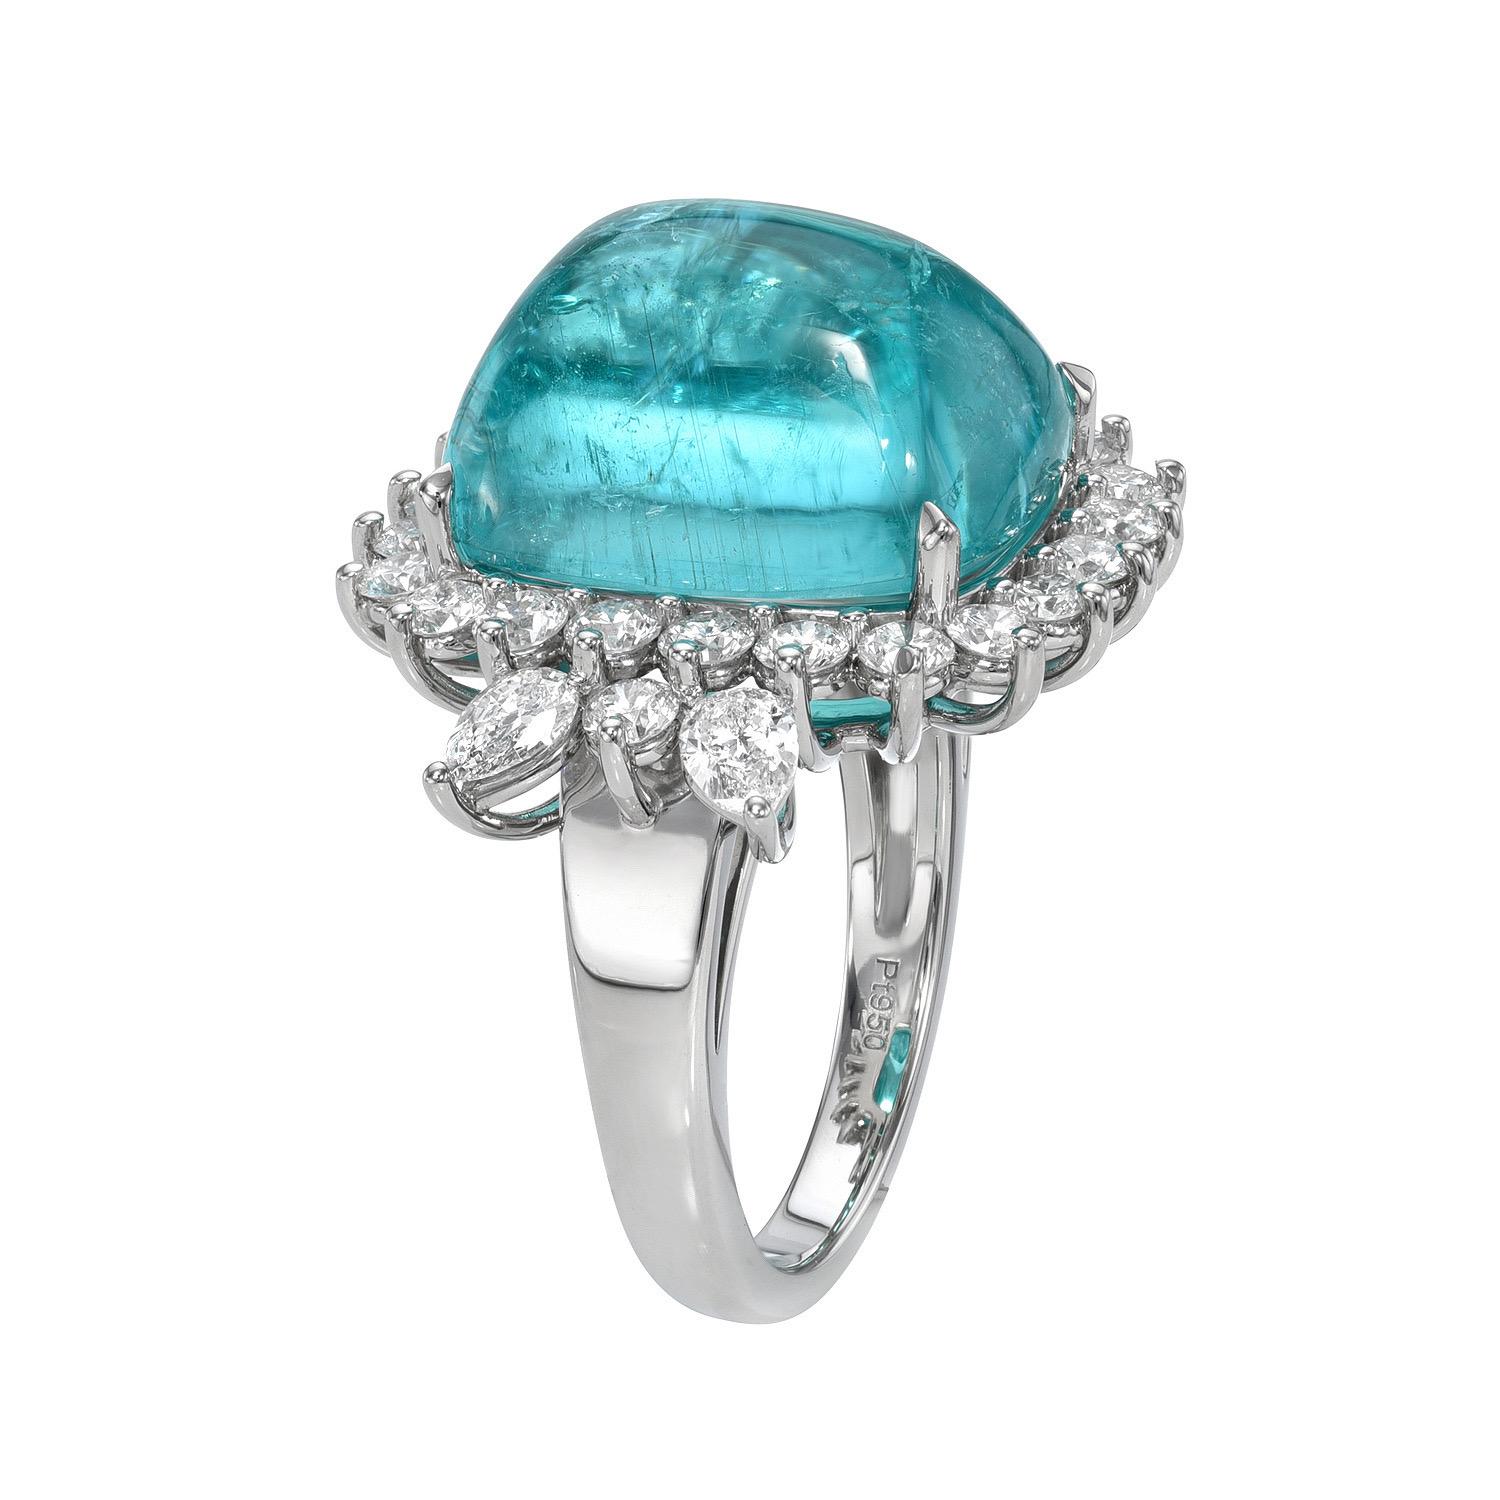 Rare and exclusive 14 carat Paraiba Tourmaline sugarloaf cabochon, decorated with E-F/VS diamonds totaling 1.60 carats, and mounted in a timeless, hand crafted, platinum ring.
Paraiba Tourmaline Dimensions: 14.89 x 12.55 x 8.25 mm.
Ring size 6.